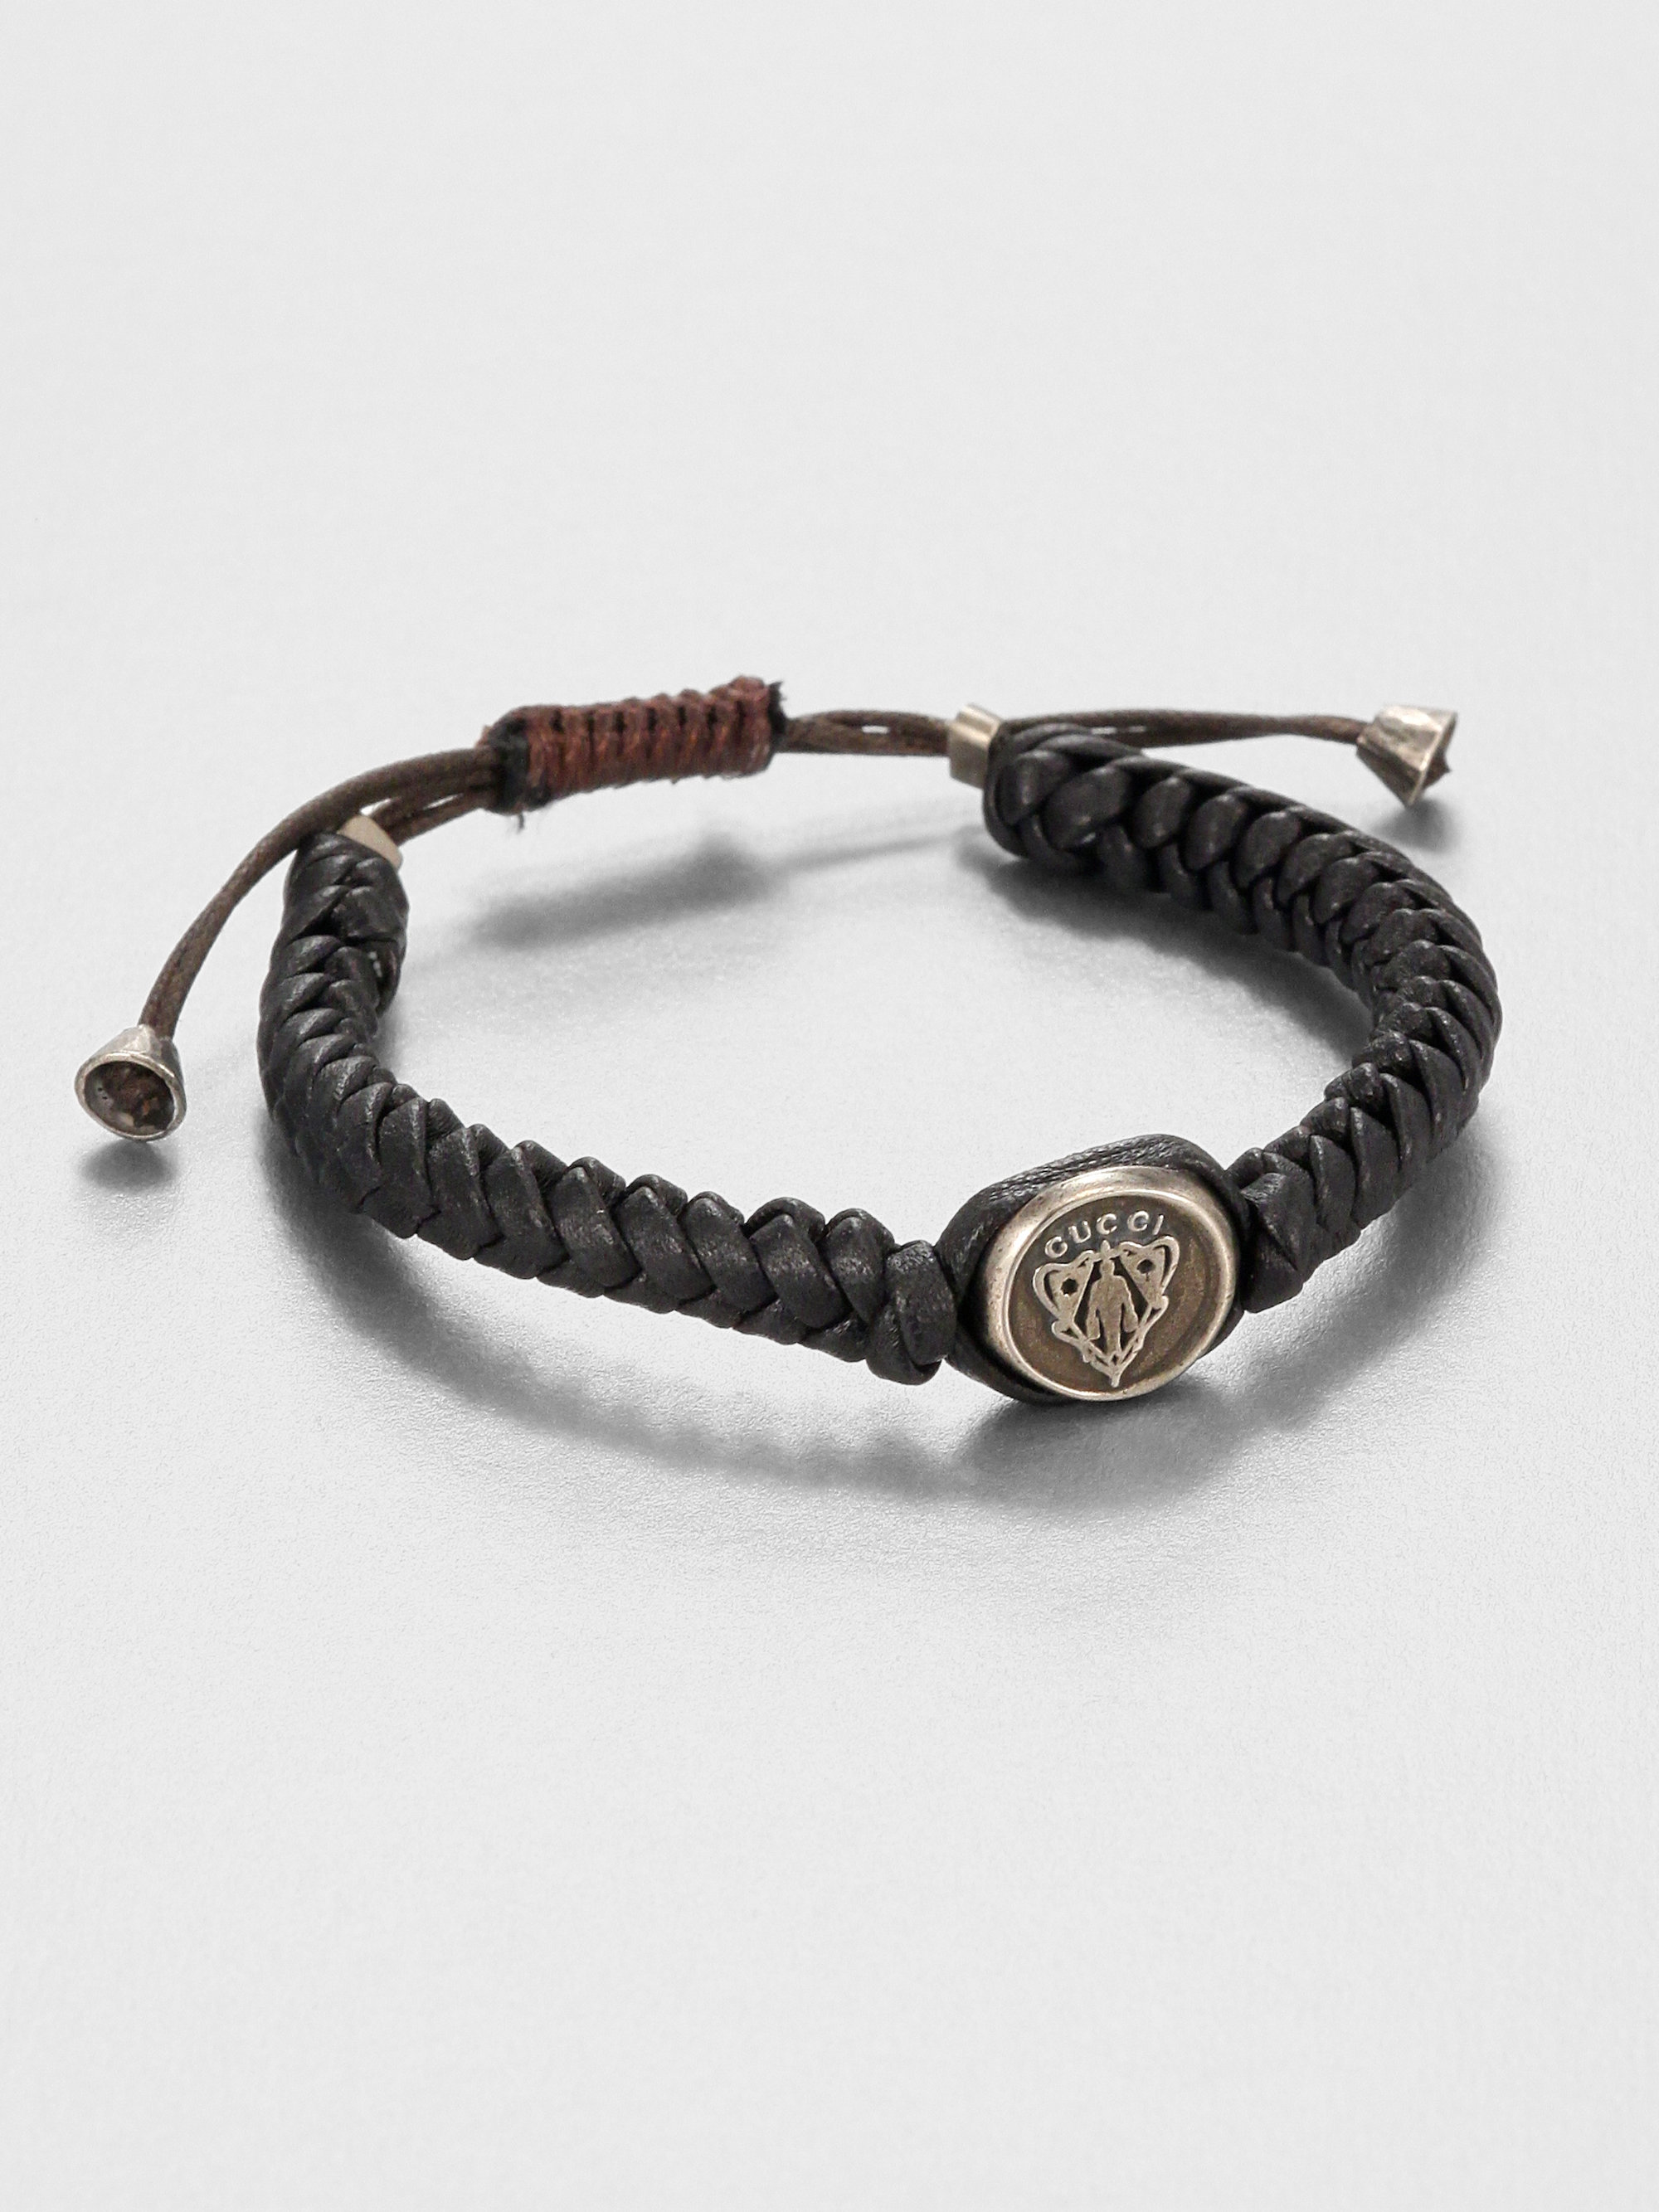 Gucci Woven Leather Bracelet in Brown for Men - Lyst